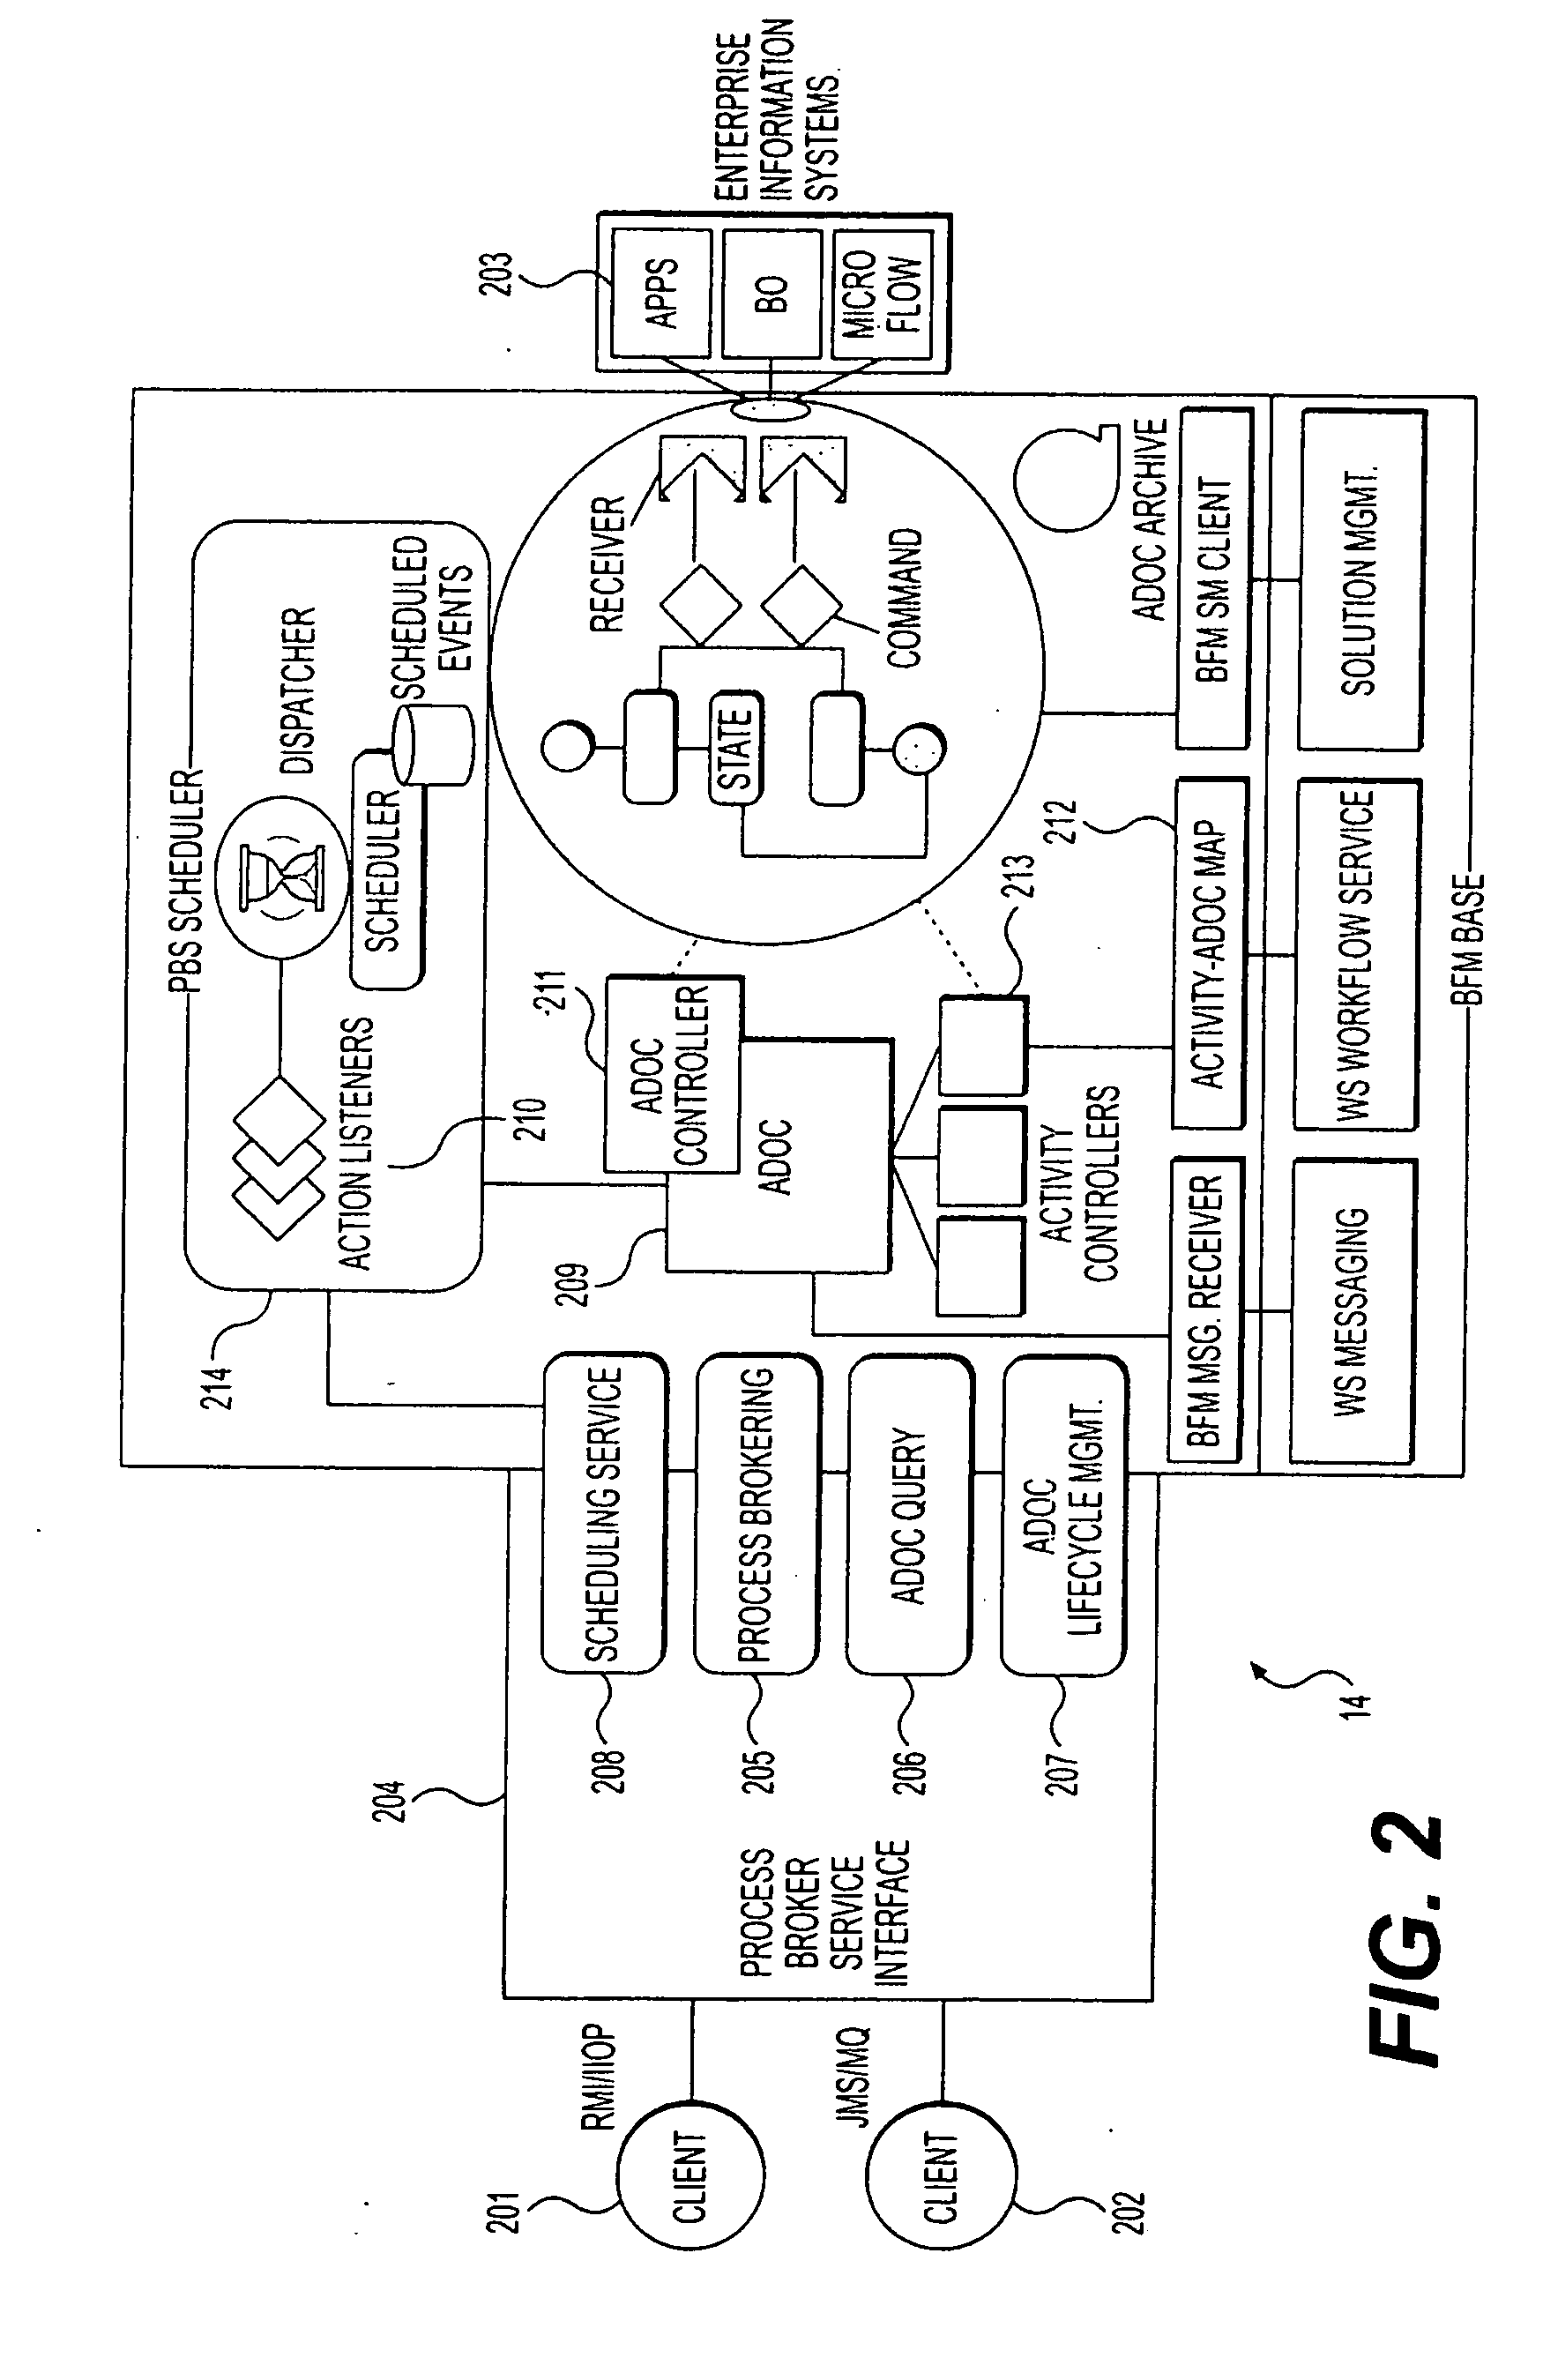 Method and System for Process Brokering and Content Integration for Collaborative Business Process Management